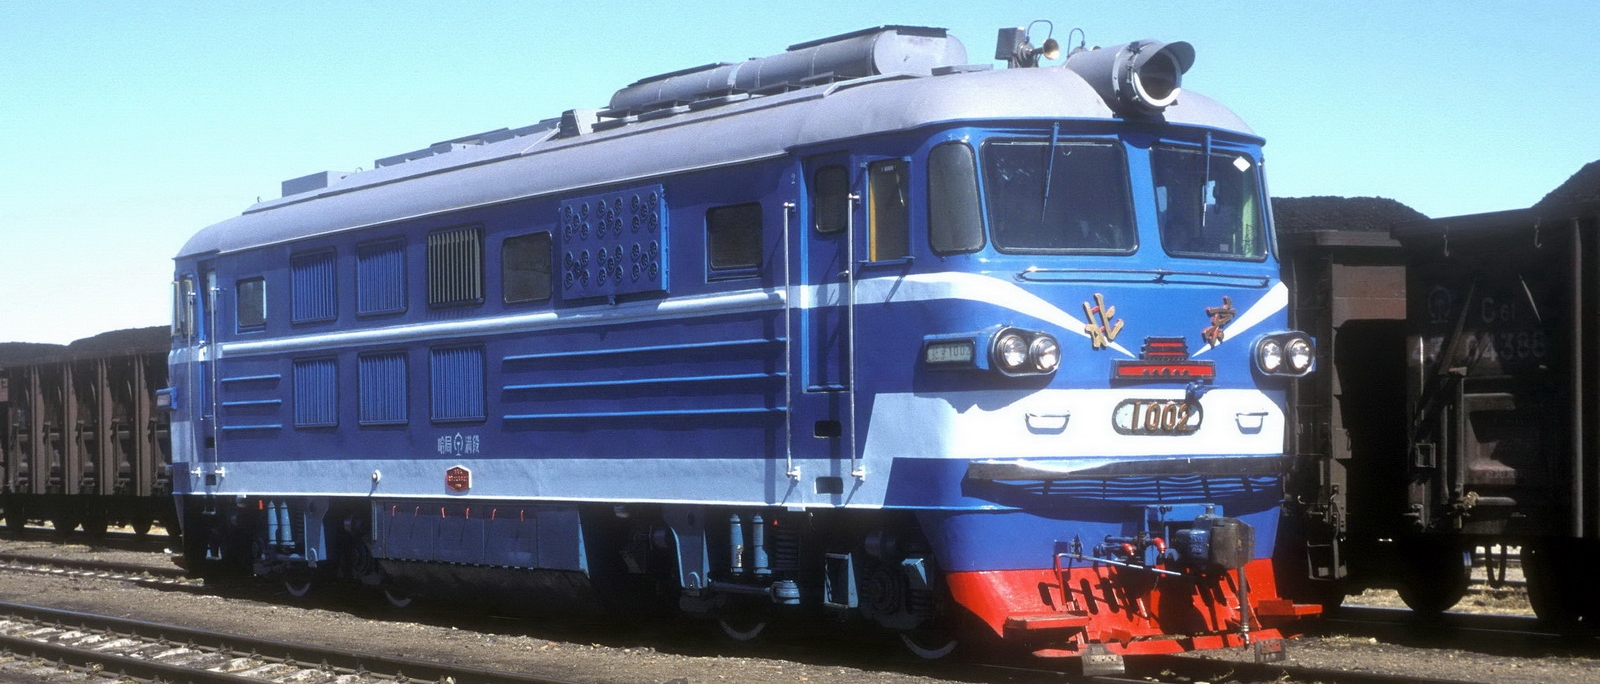 Number 1001 from the series of locomotives built for cross-border traffic